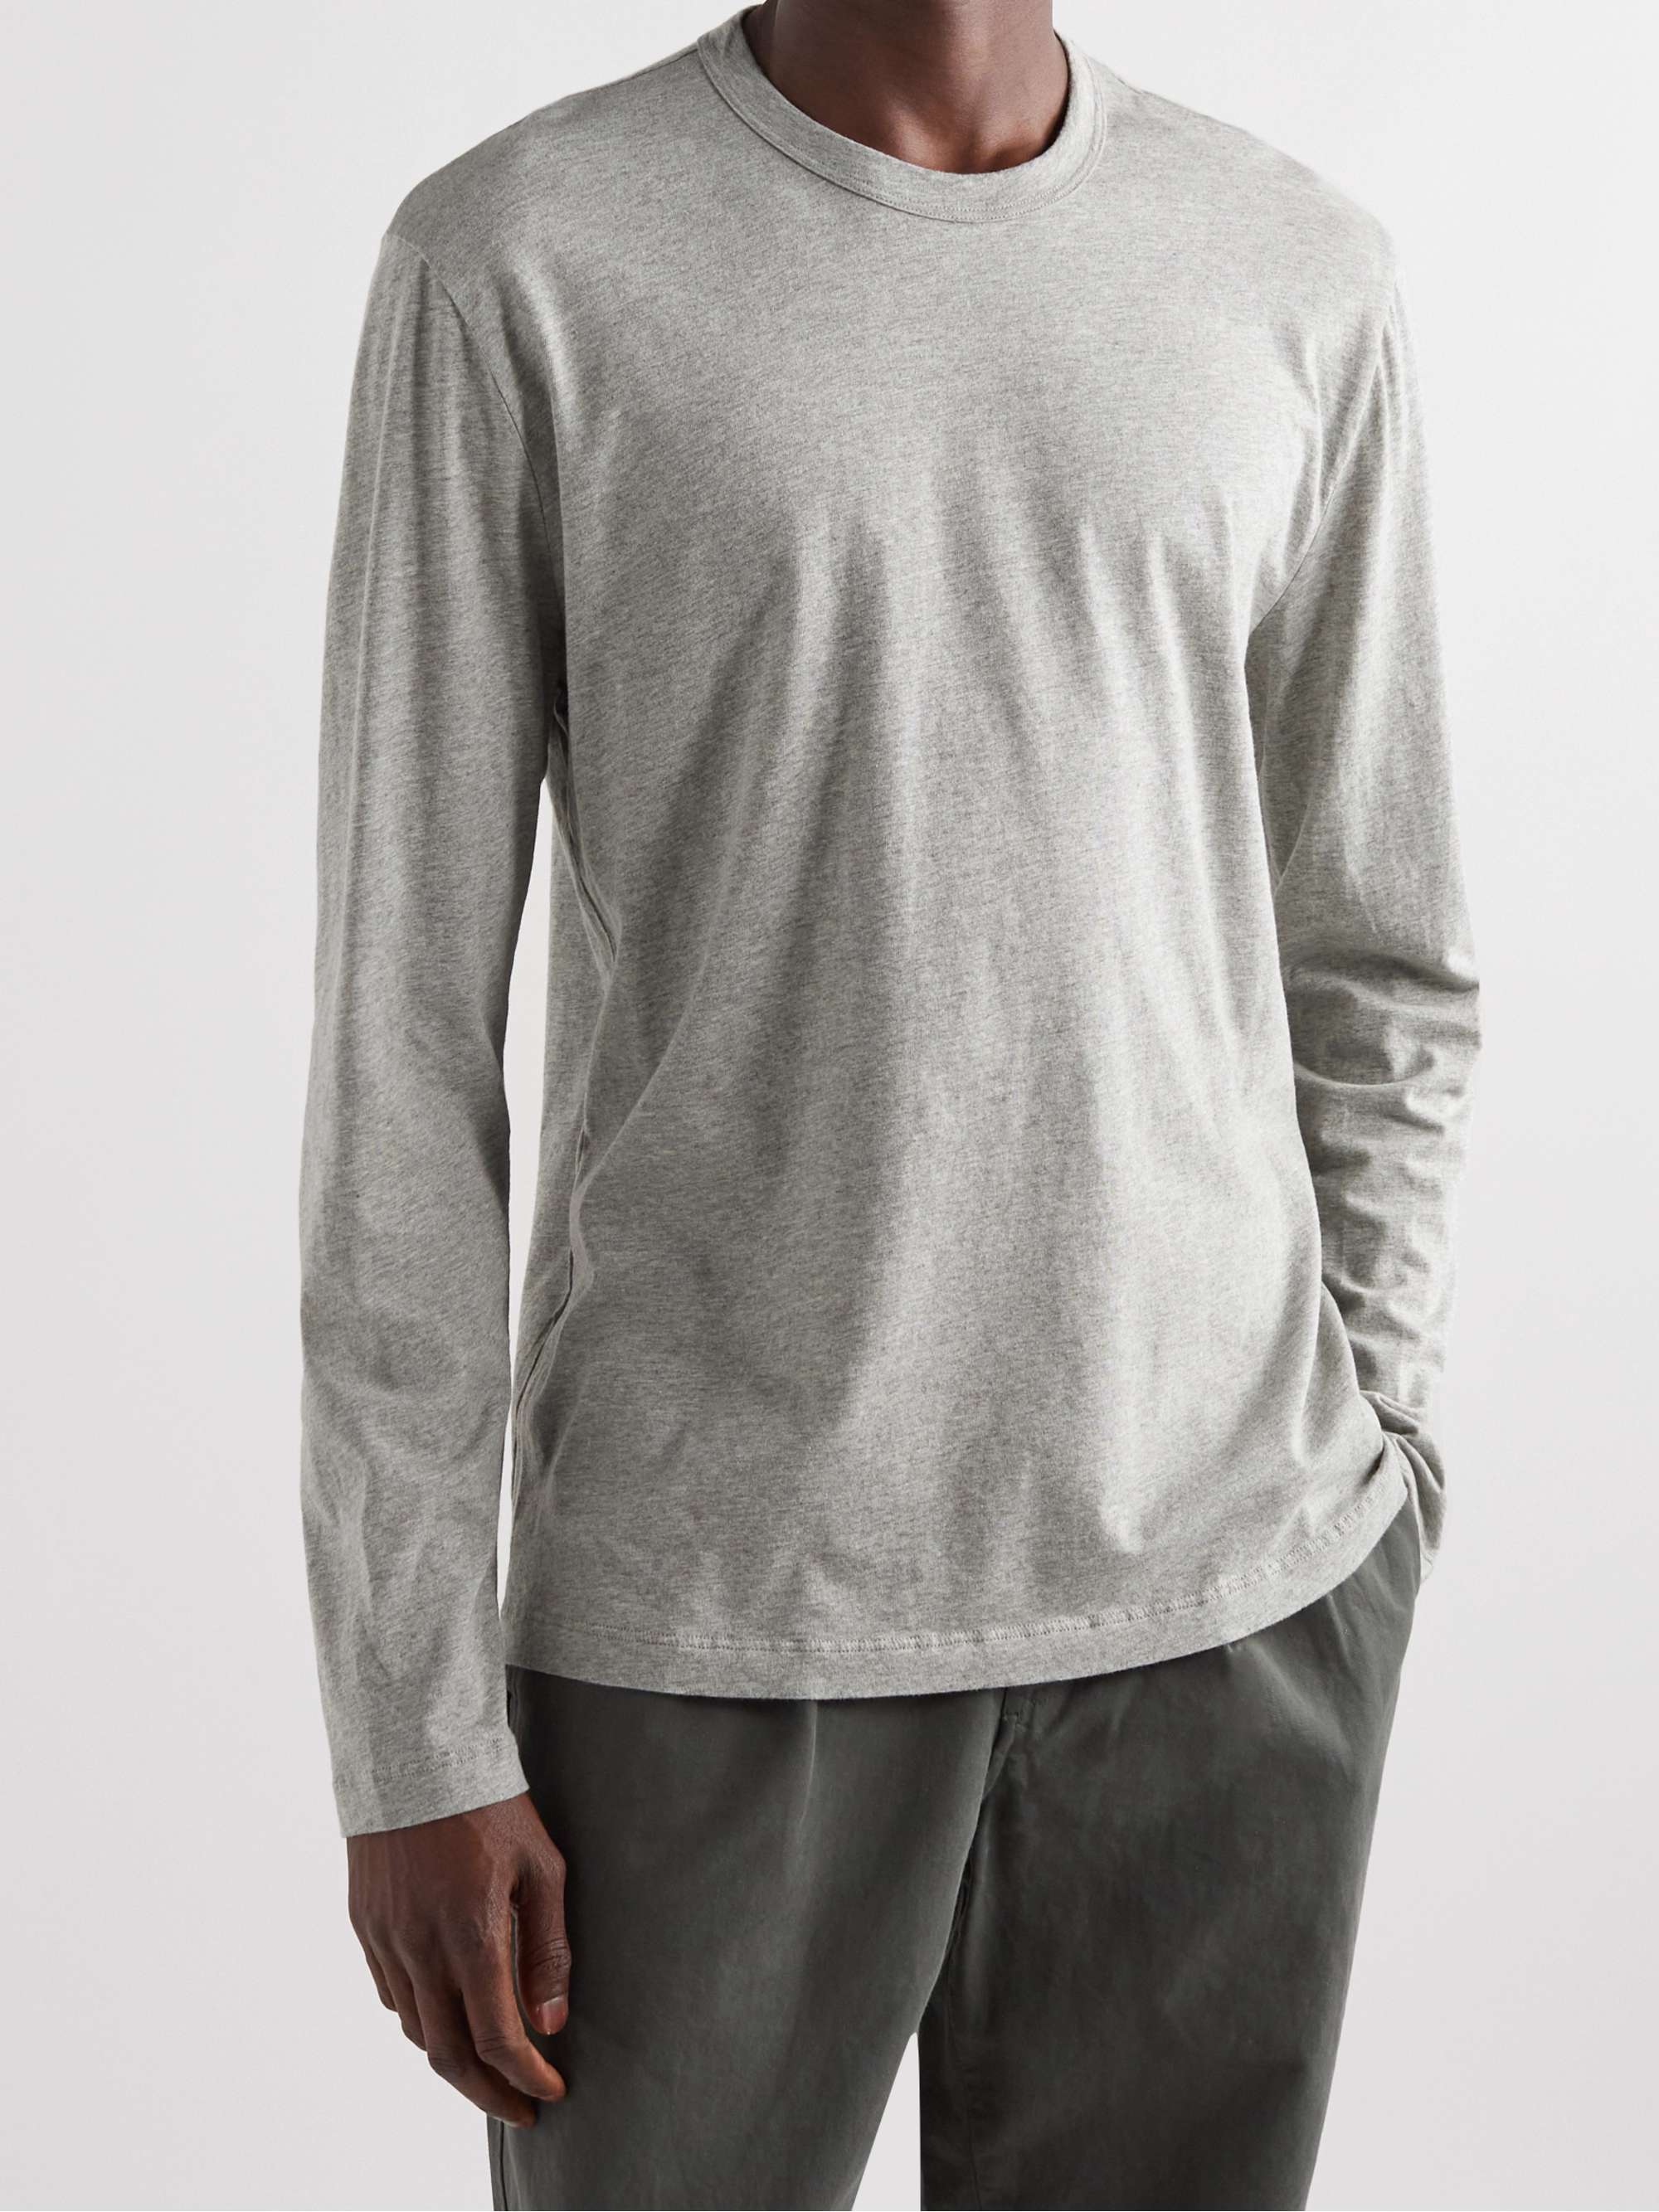 Gray Combed Cotton-Jersey T-Shirt | JAMES PERSE | MR PORTER